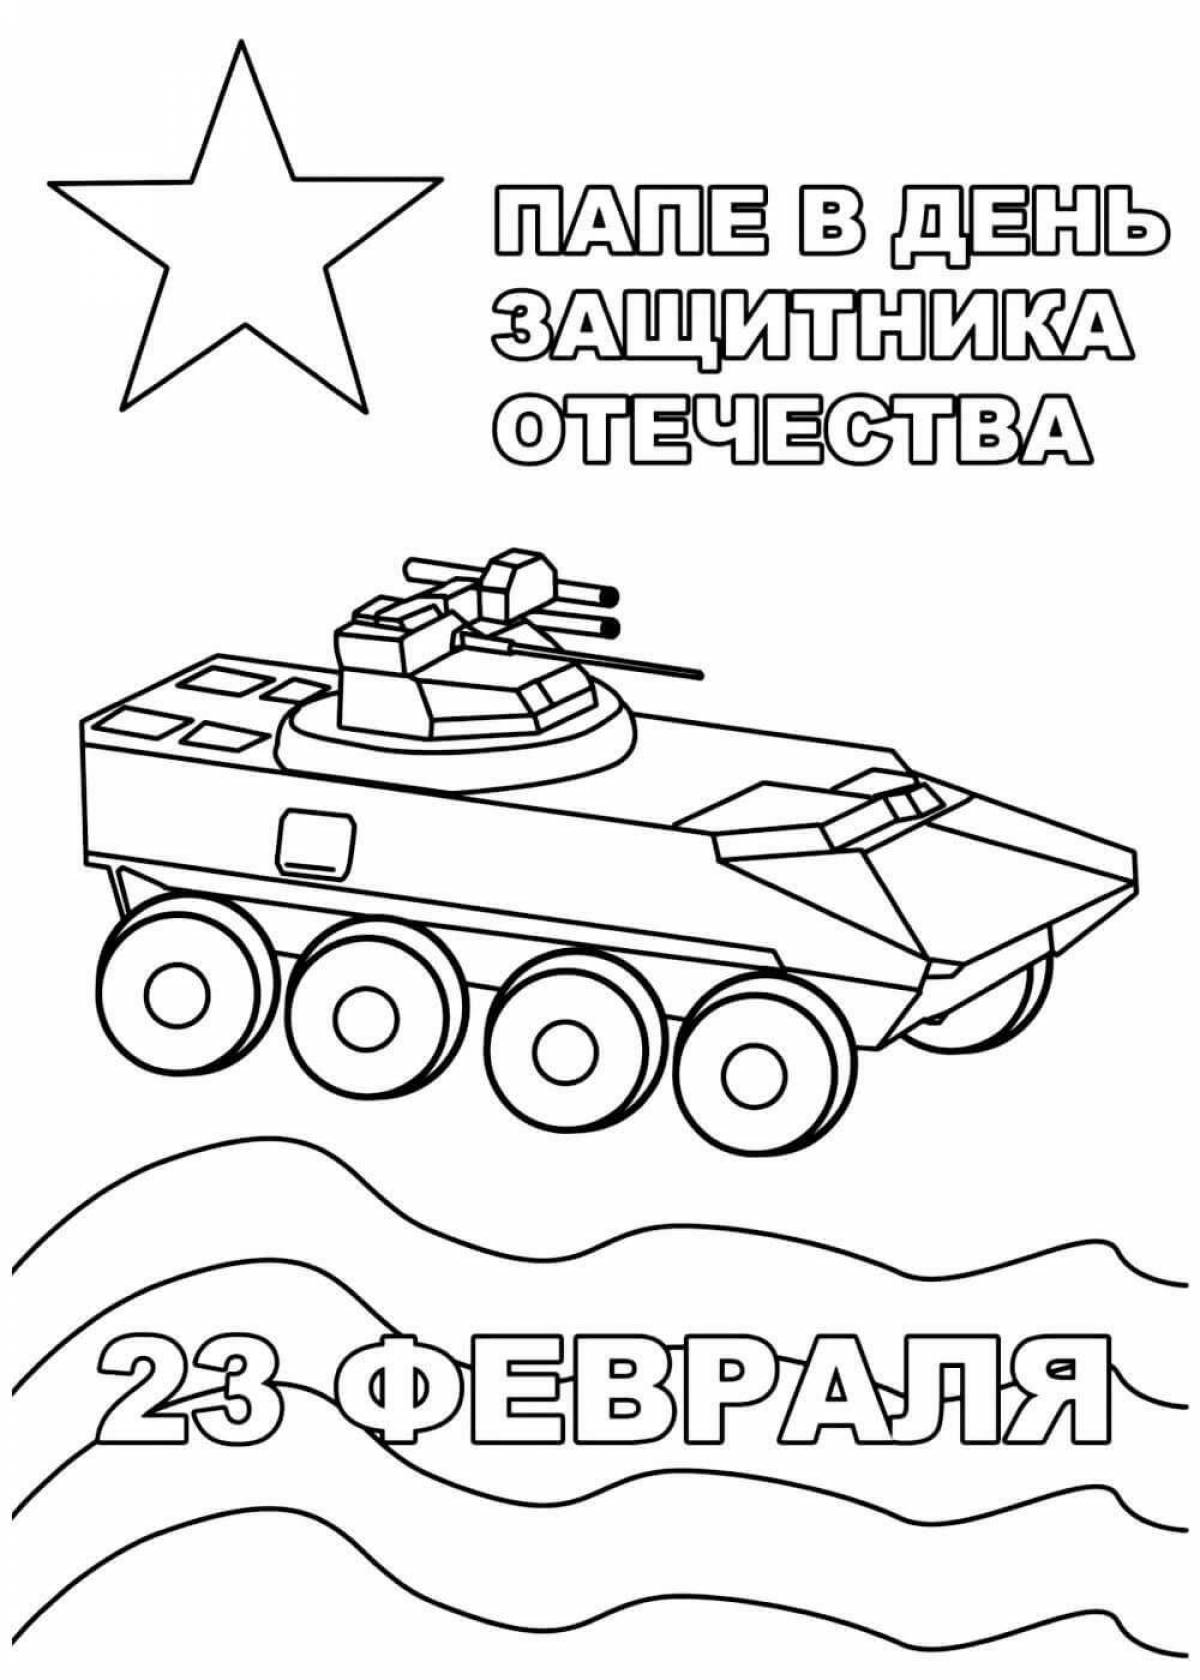 Delightful coloring book for Defender of the Fatherland Day